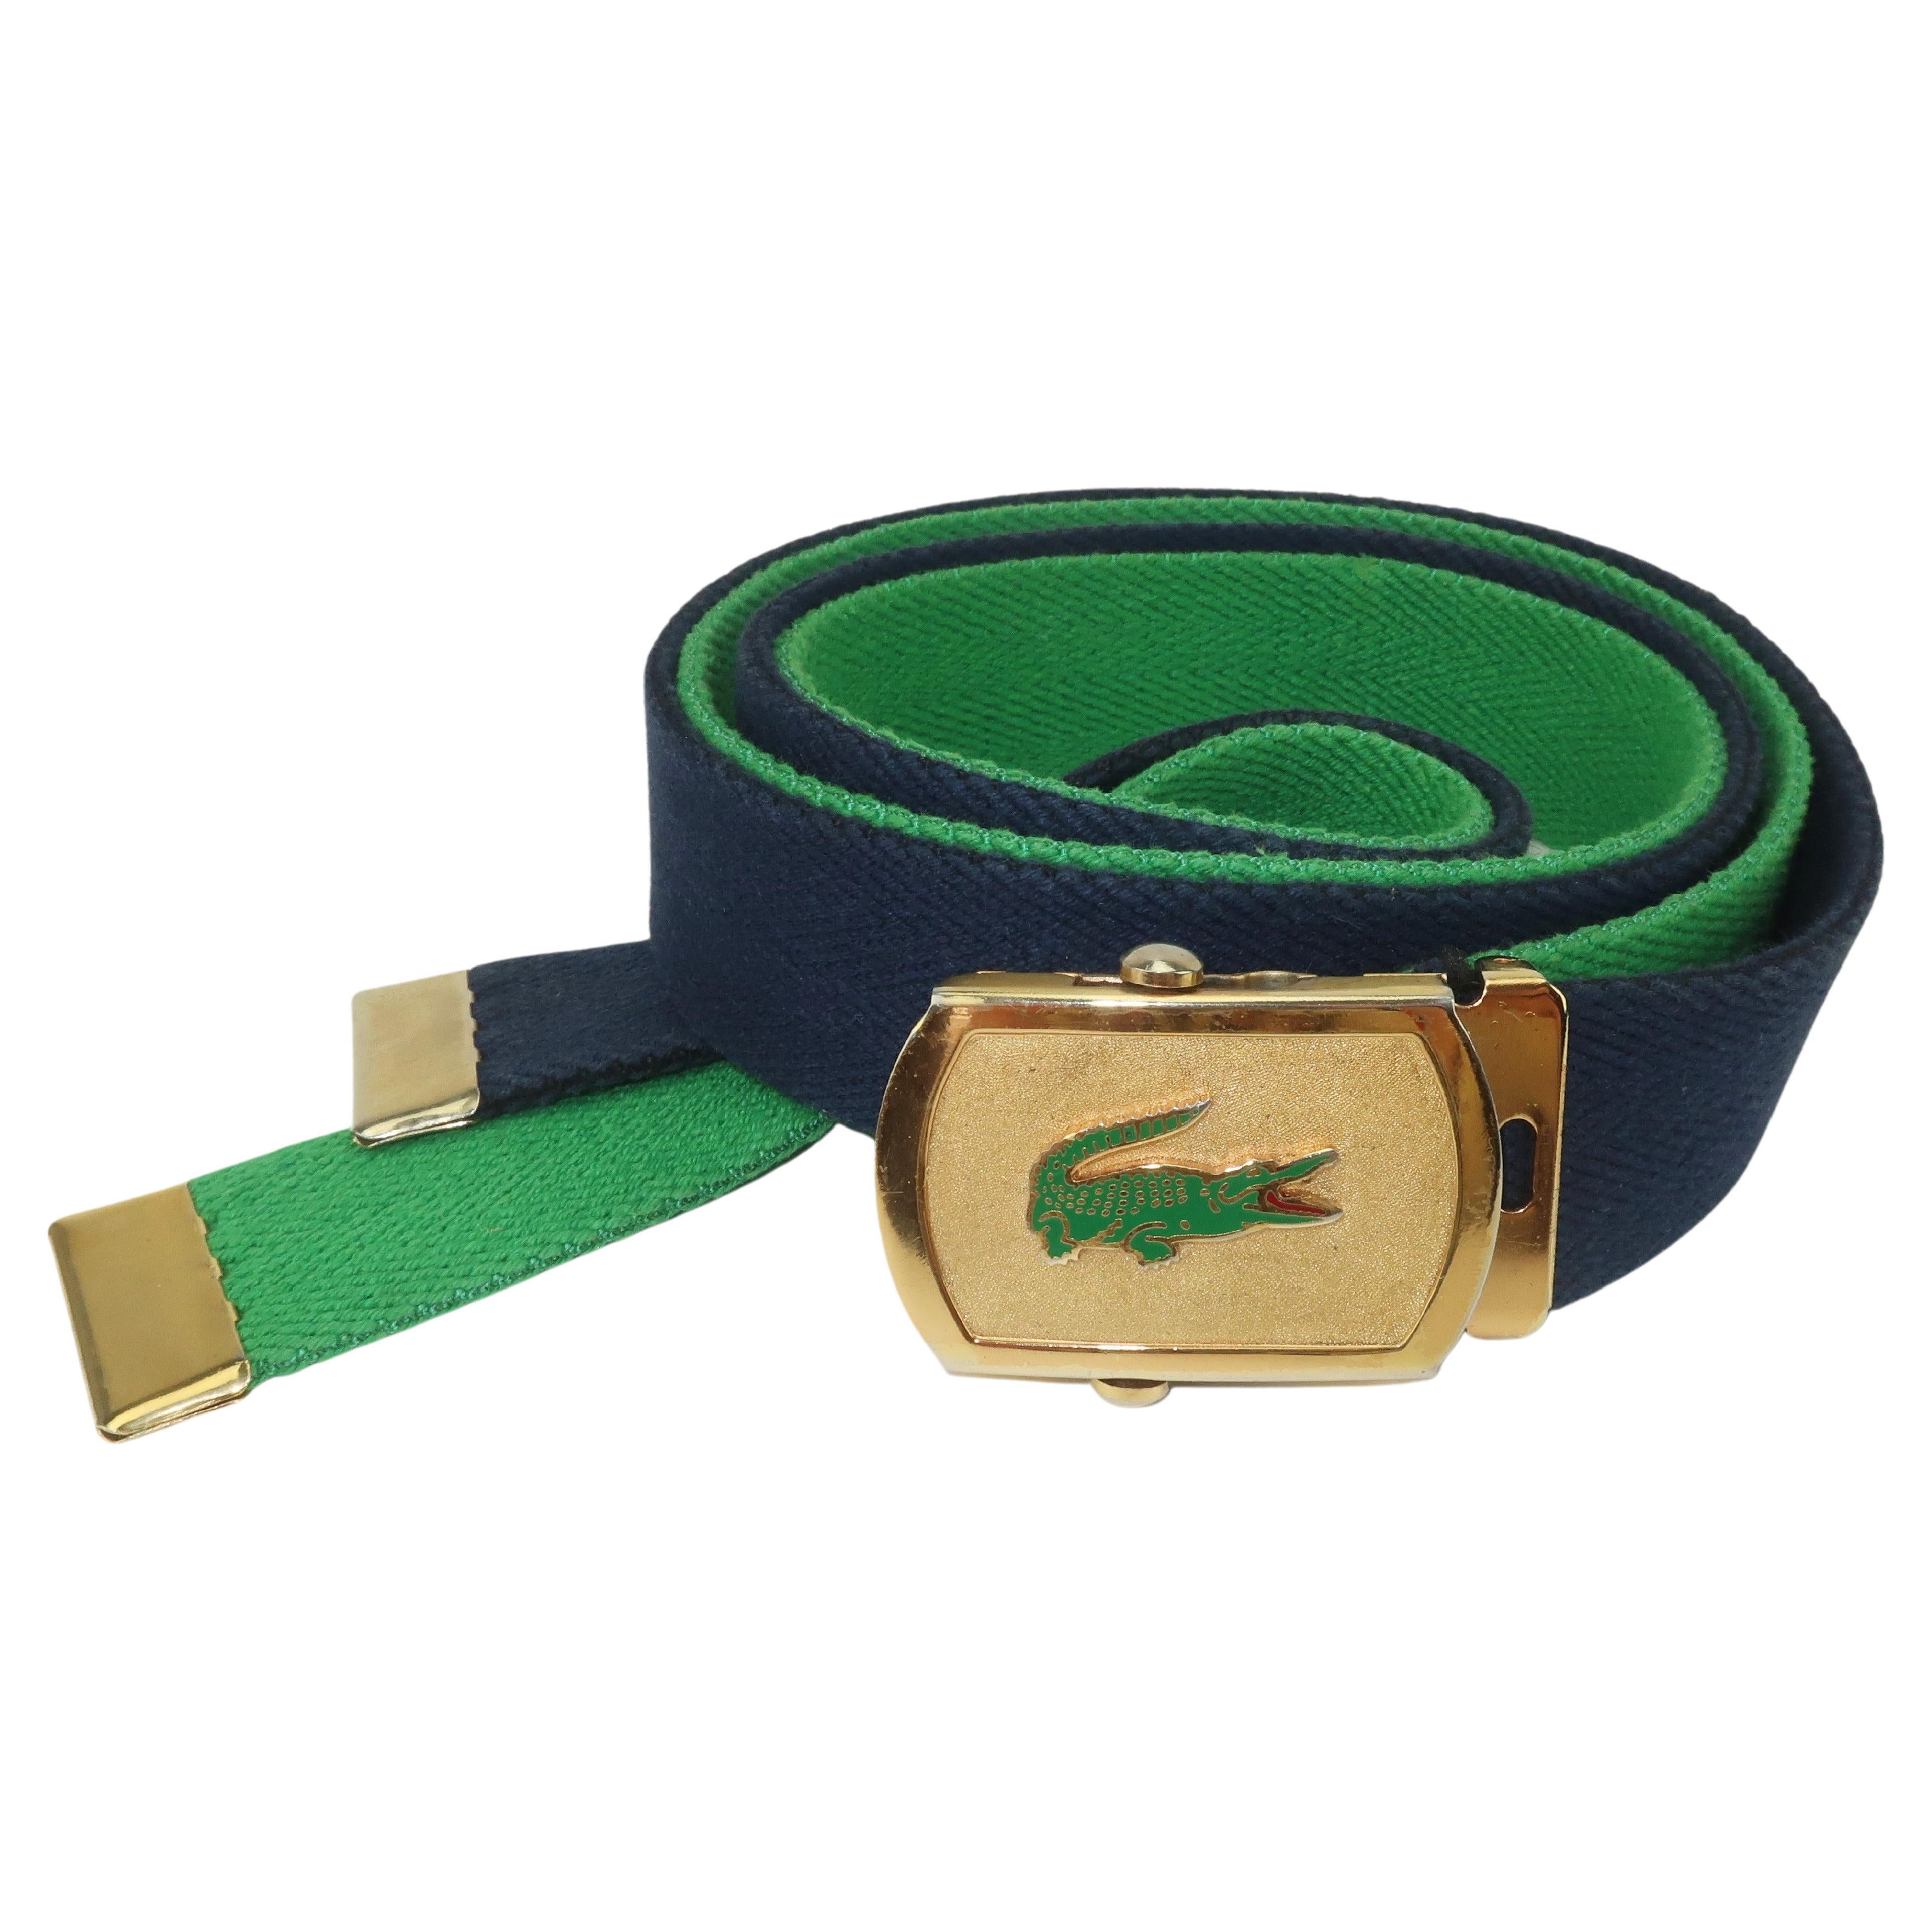 Vintage Made in Italy Izod Lacoste Buckle With Two Belts, 1970's